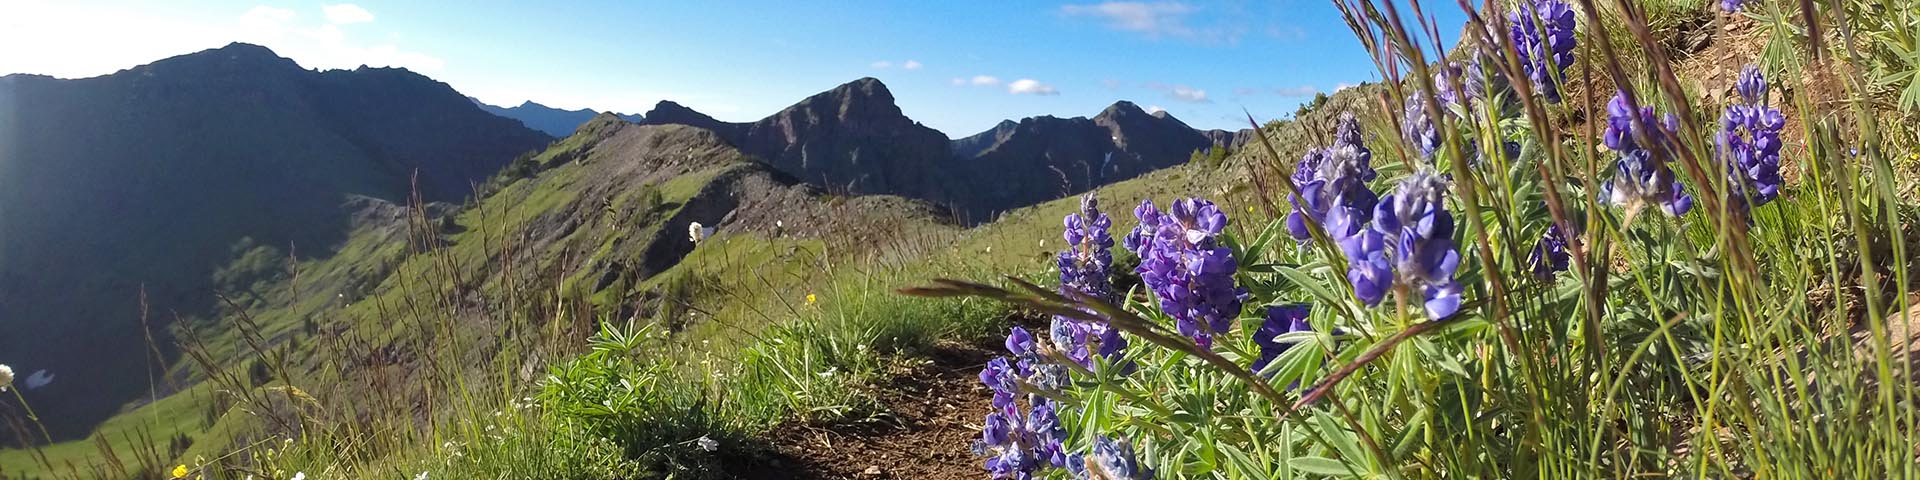 A ridgeline trail with flowers and blue sky